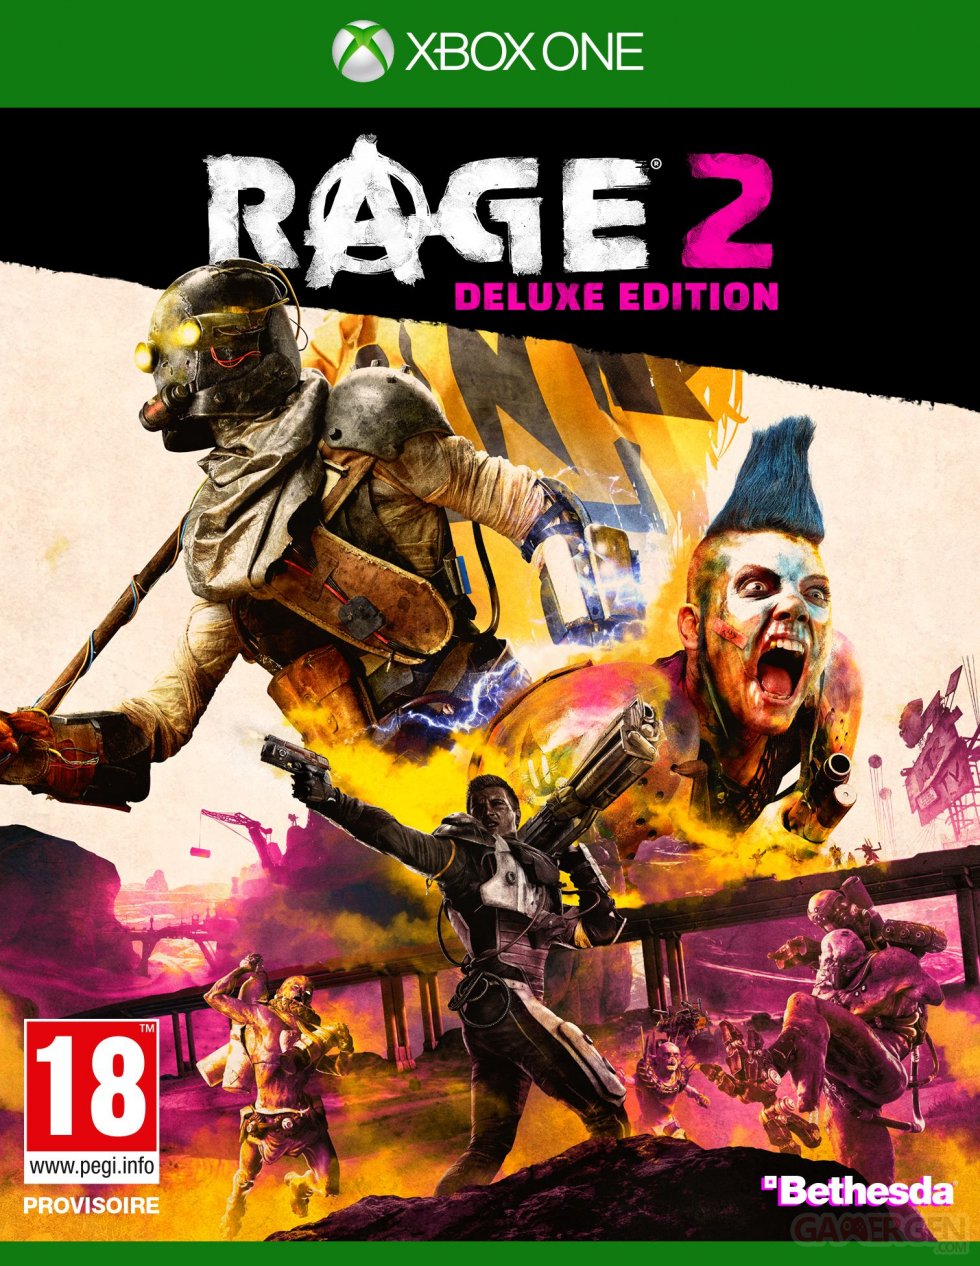 RAGE-2-jaquette-Deluxe-Edition-Xbox-One-11-06-2018